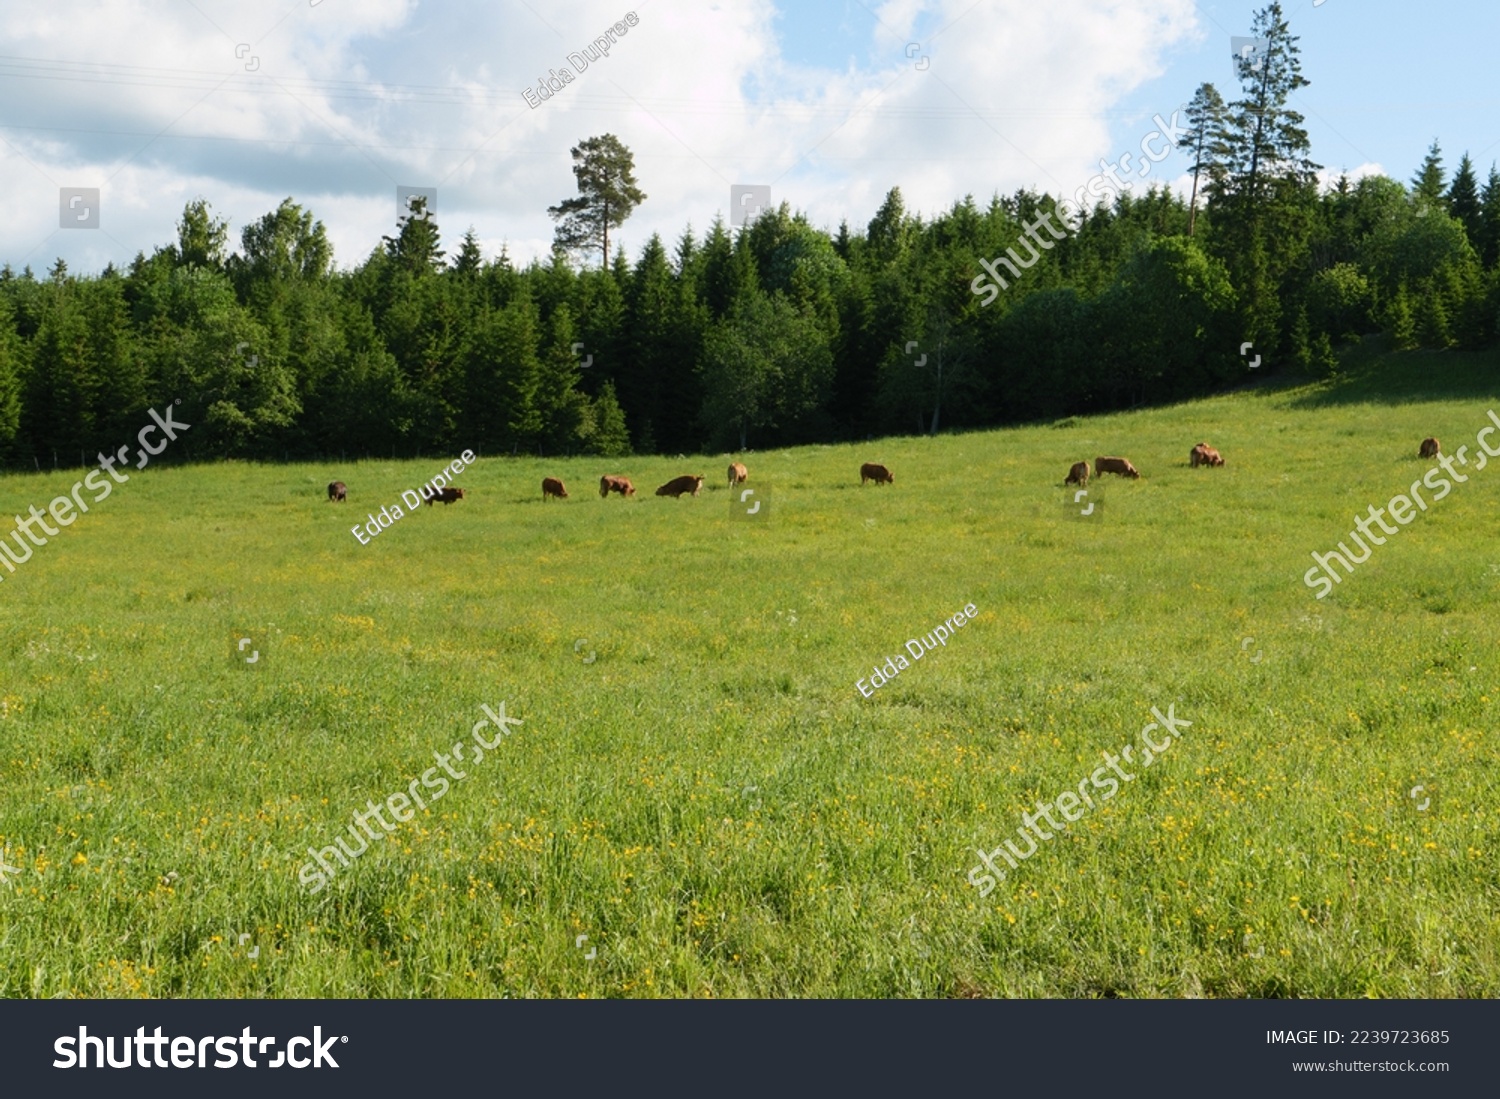 A pasture with grazing cows in spring. In the background a forest. Seen on the Olavsweg a pilgrimage route from Oslo to Trodheim near Jessheim in the province of Viken. Norway. #2239723685